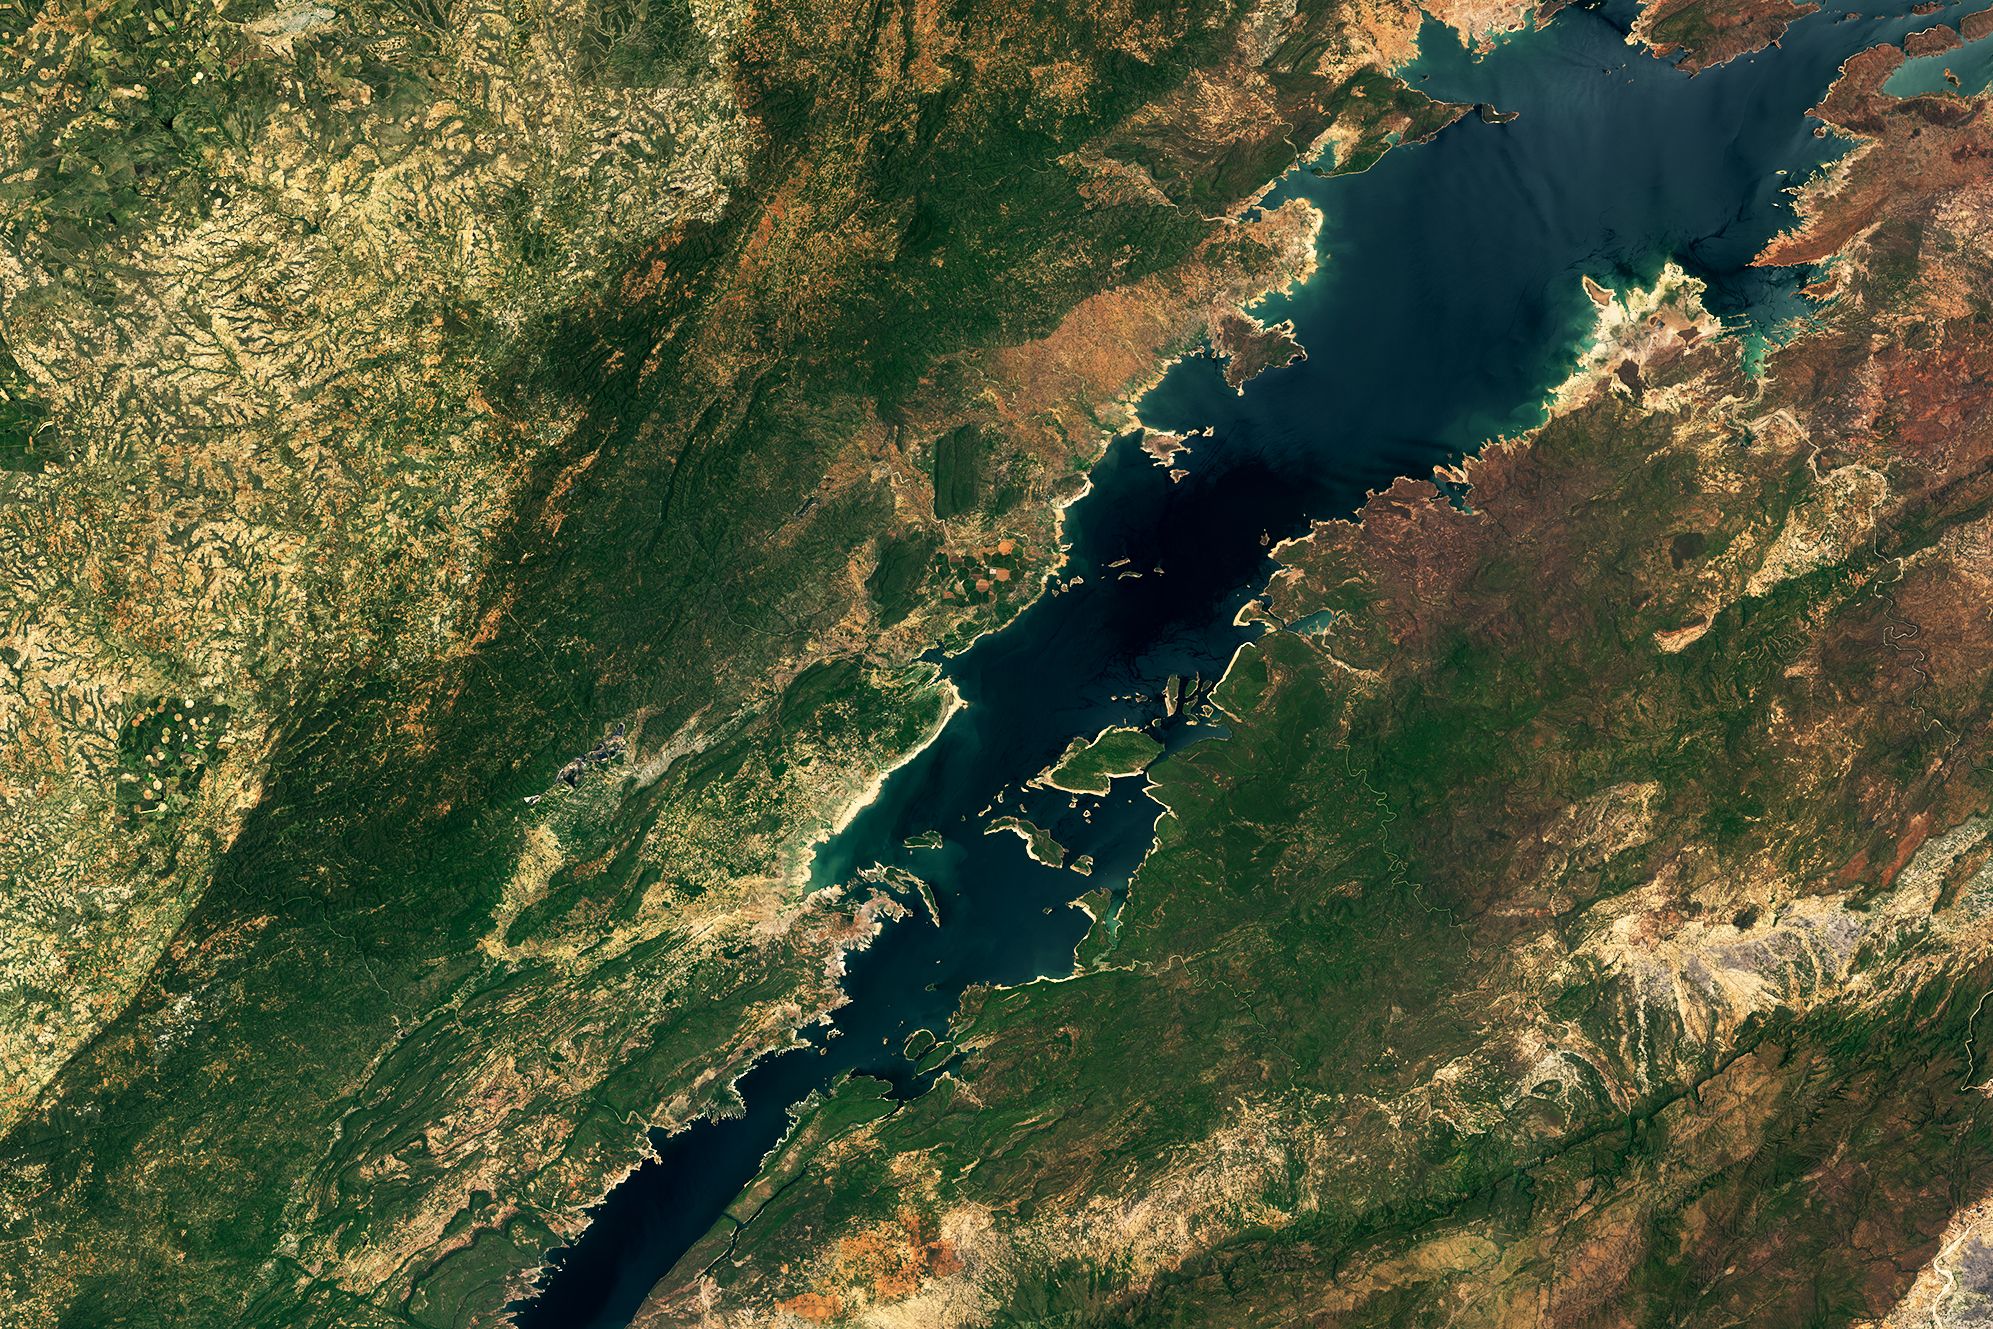 Lake Kariba image obtained  using MODIS data from NASA EOSDIS LANCE and GIBS/Worldview and Landsat-8 data from the U.S. Geological Survey